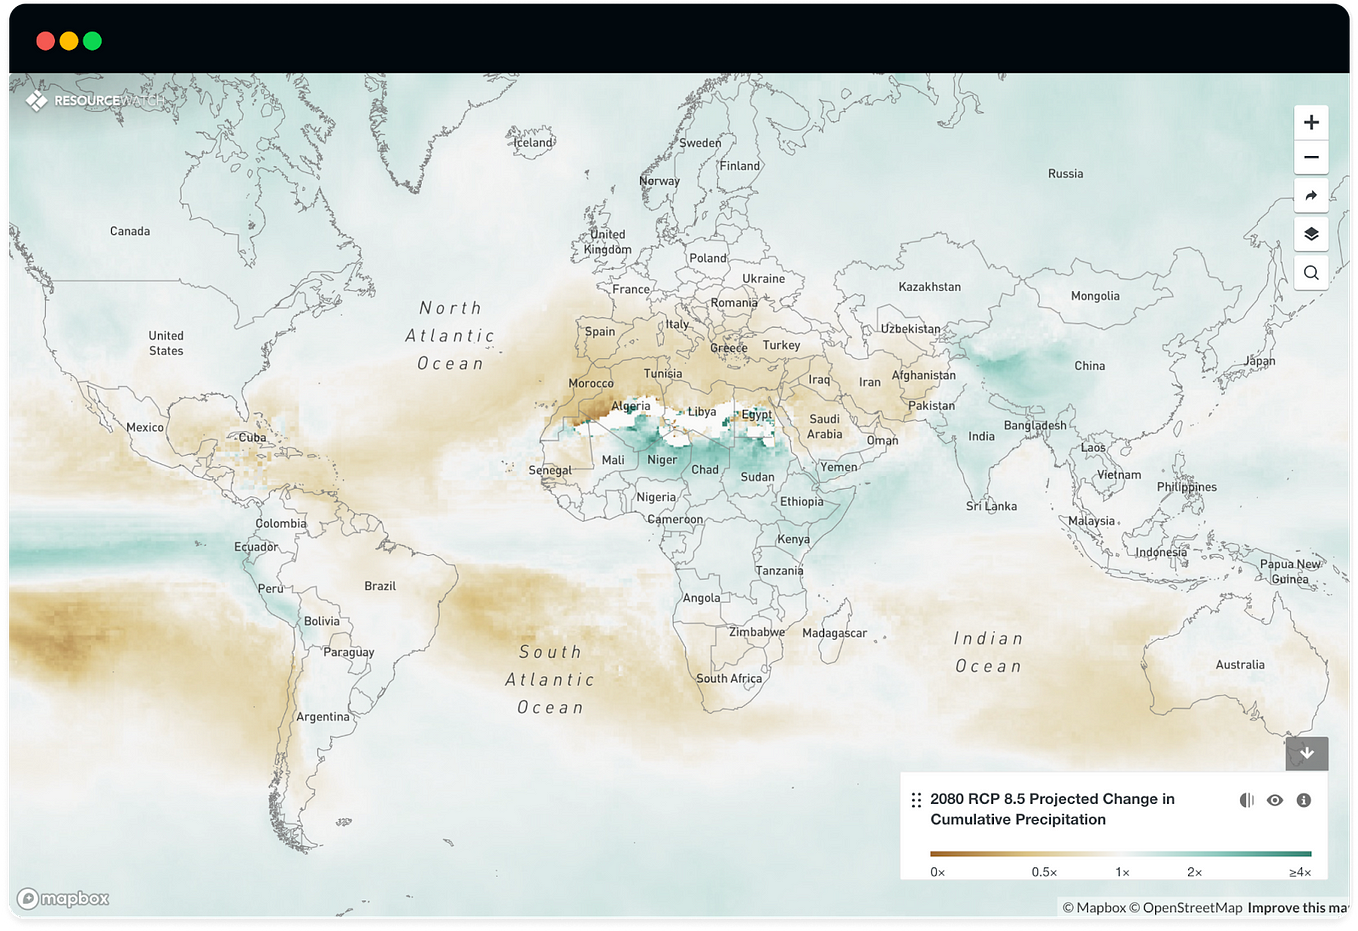 Water stress is increasing around the world. What does this mean?